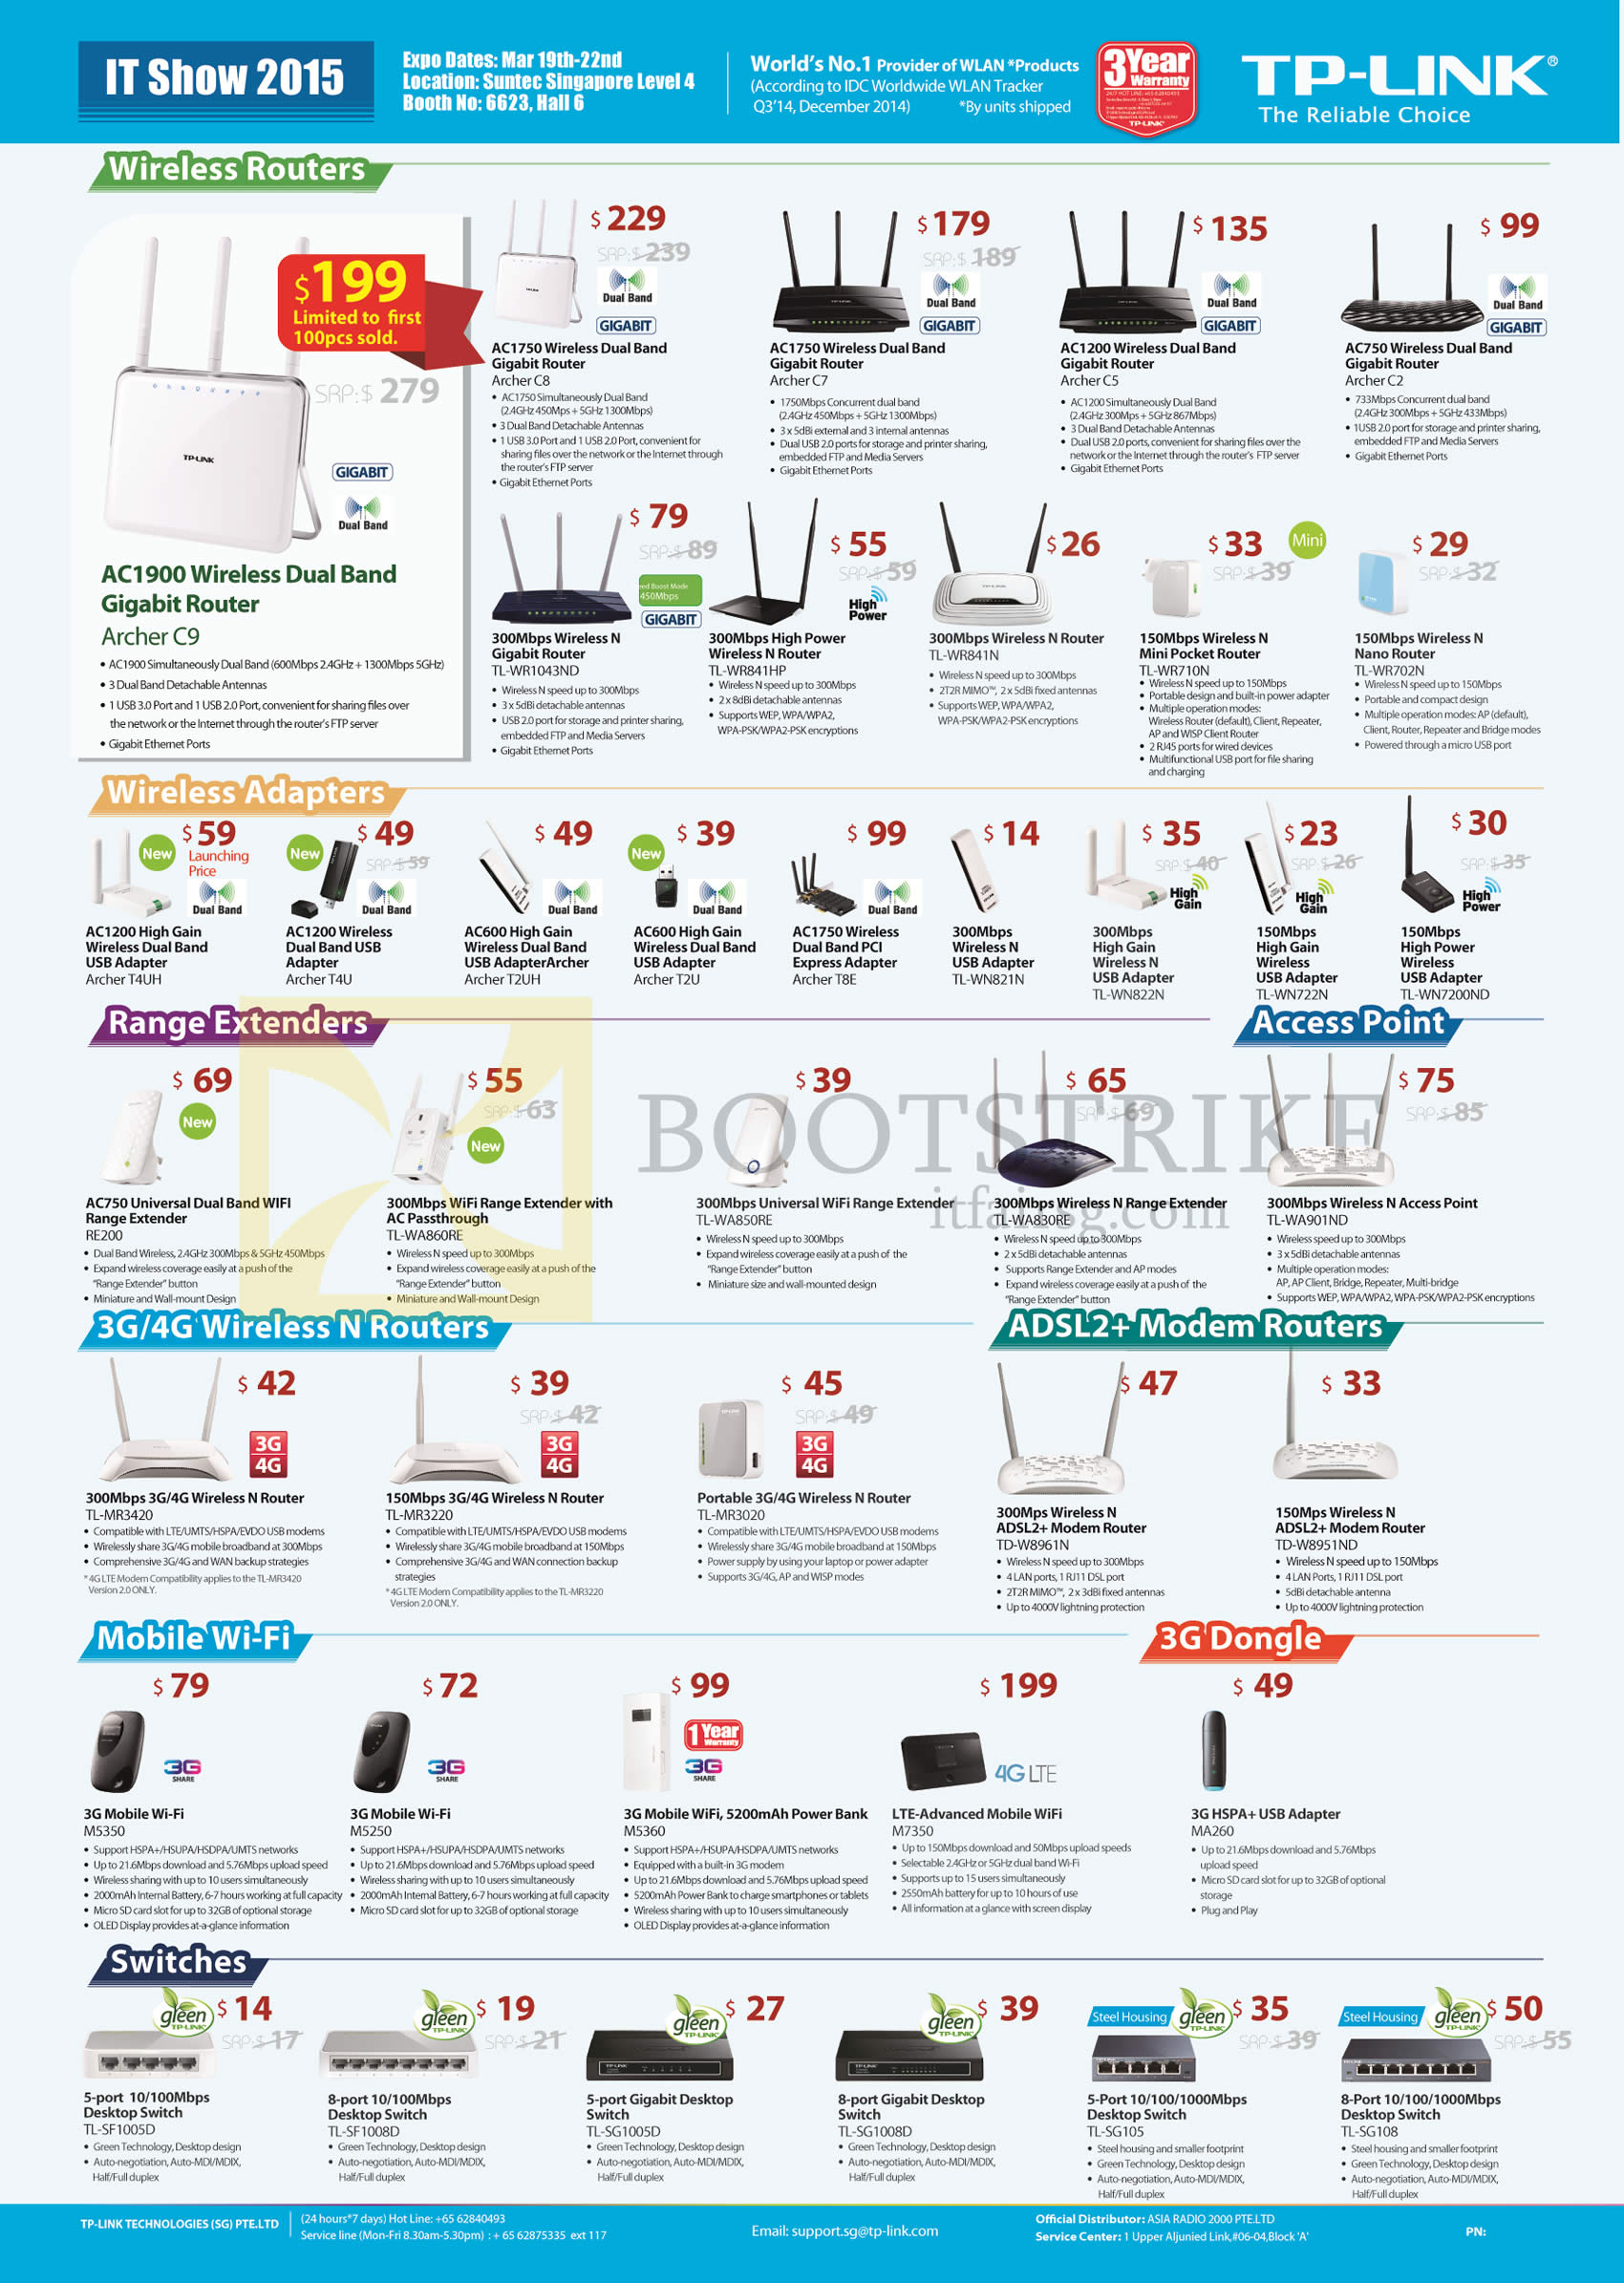 IT SHOW 2015 price list image brochure of Asia Radio TP-Link Networking Routers, Adapters, Range Extenders, Wireless N Router, ADSL2 Modem Router, 3G Dongle, Switches